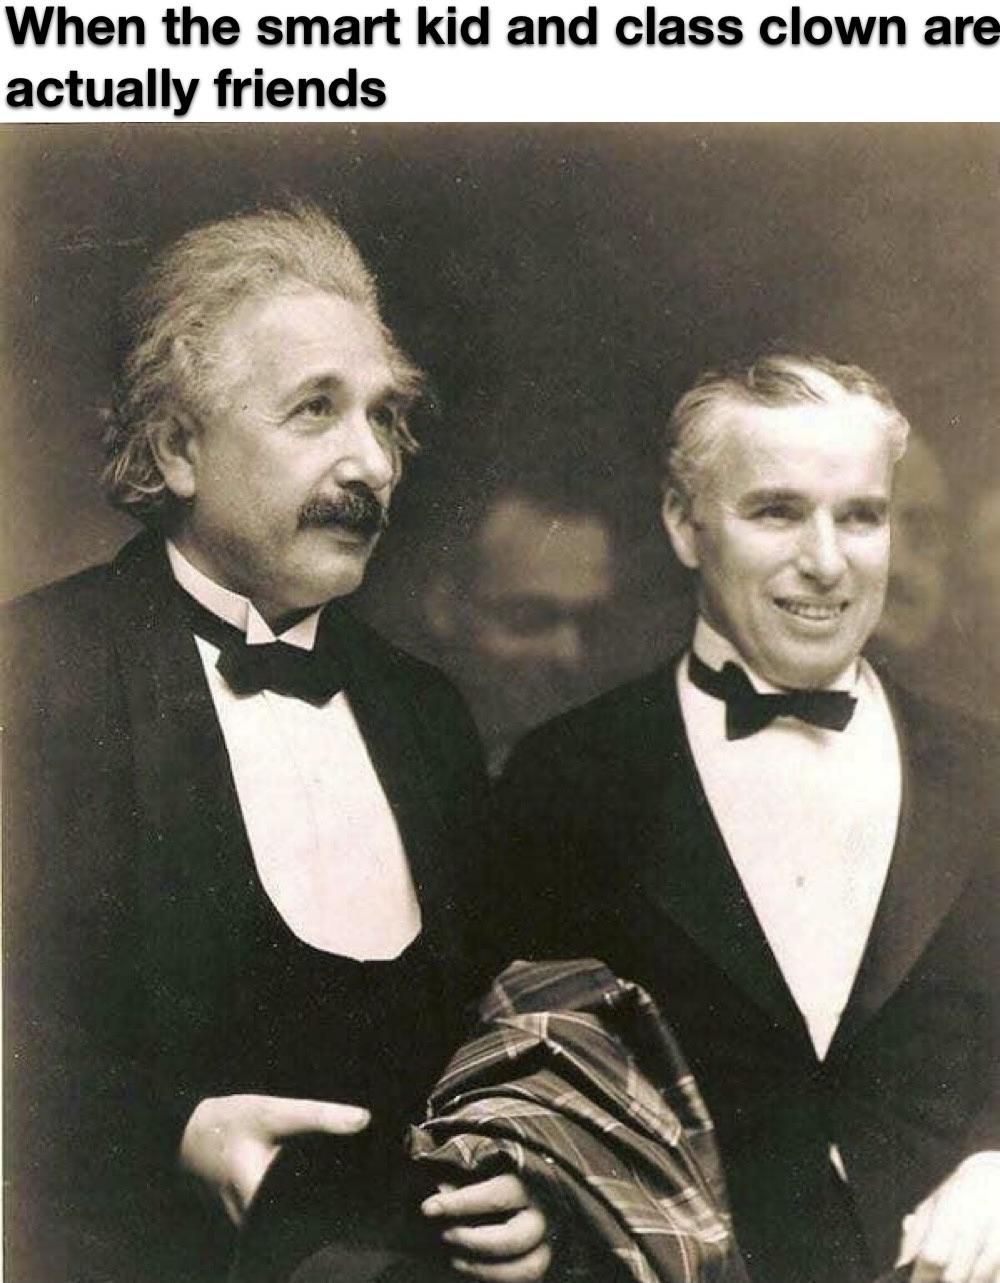 The person on the right is Charlie Chaplin btw